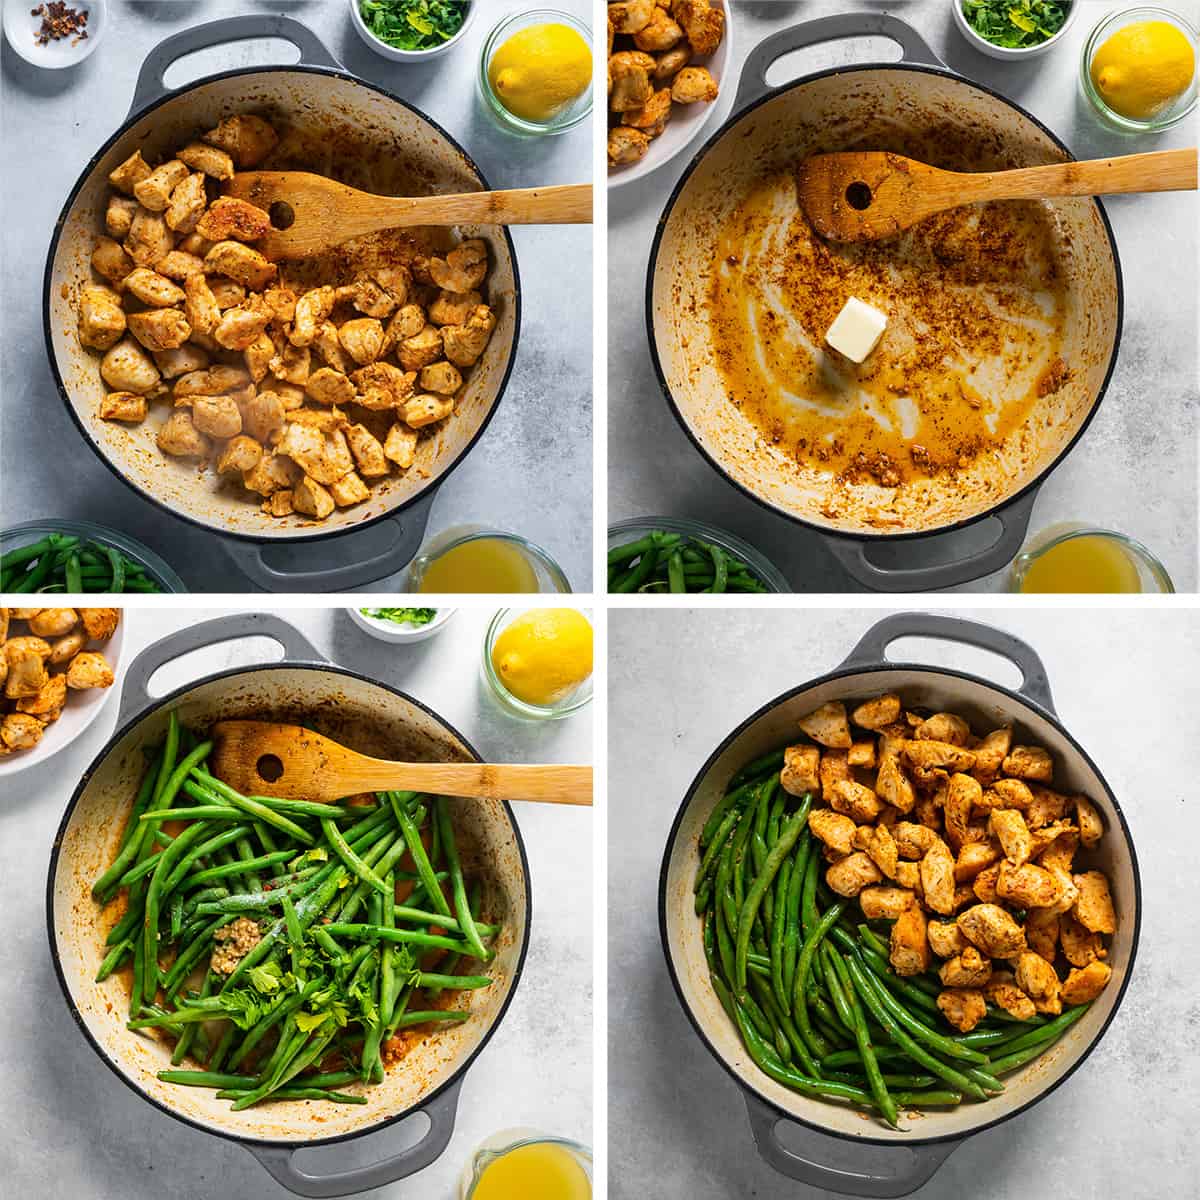 Four images showing chicken, butter, green beans, and other ingredients cooking in a sauté pan.